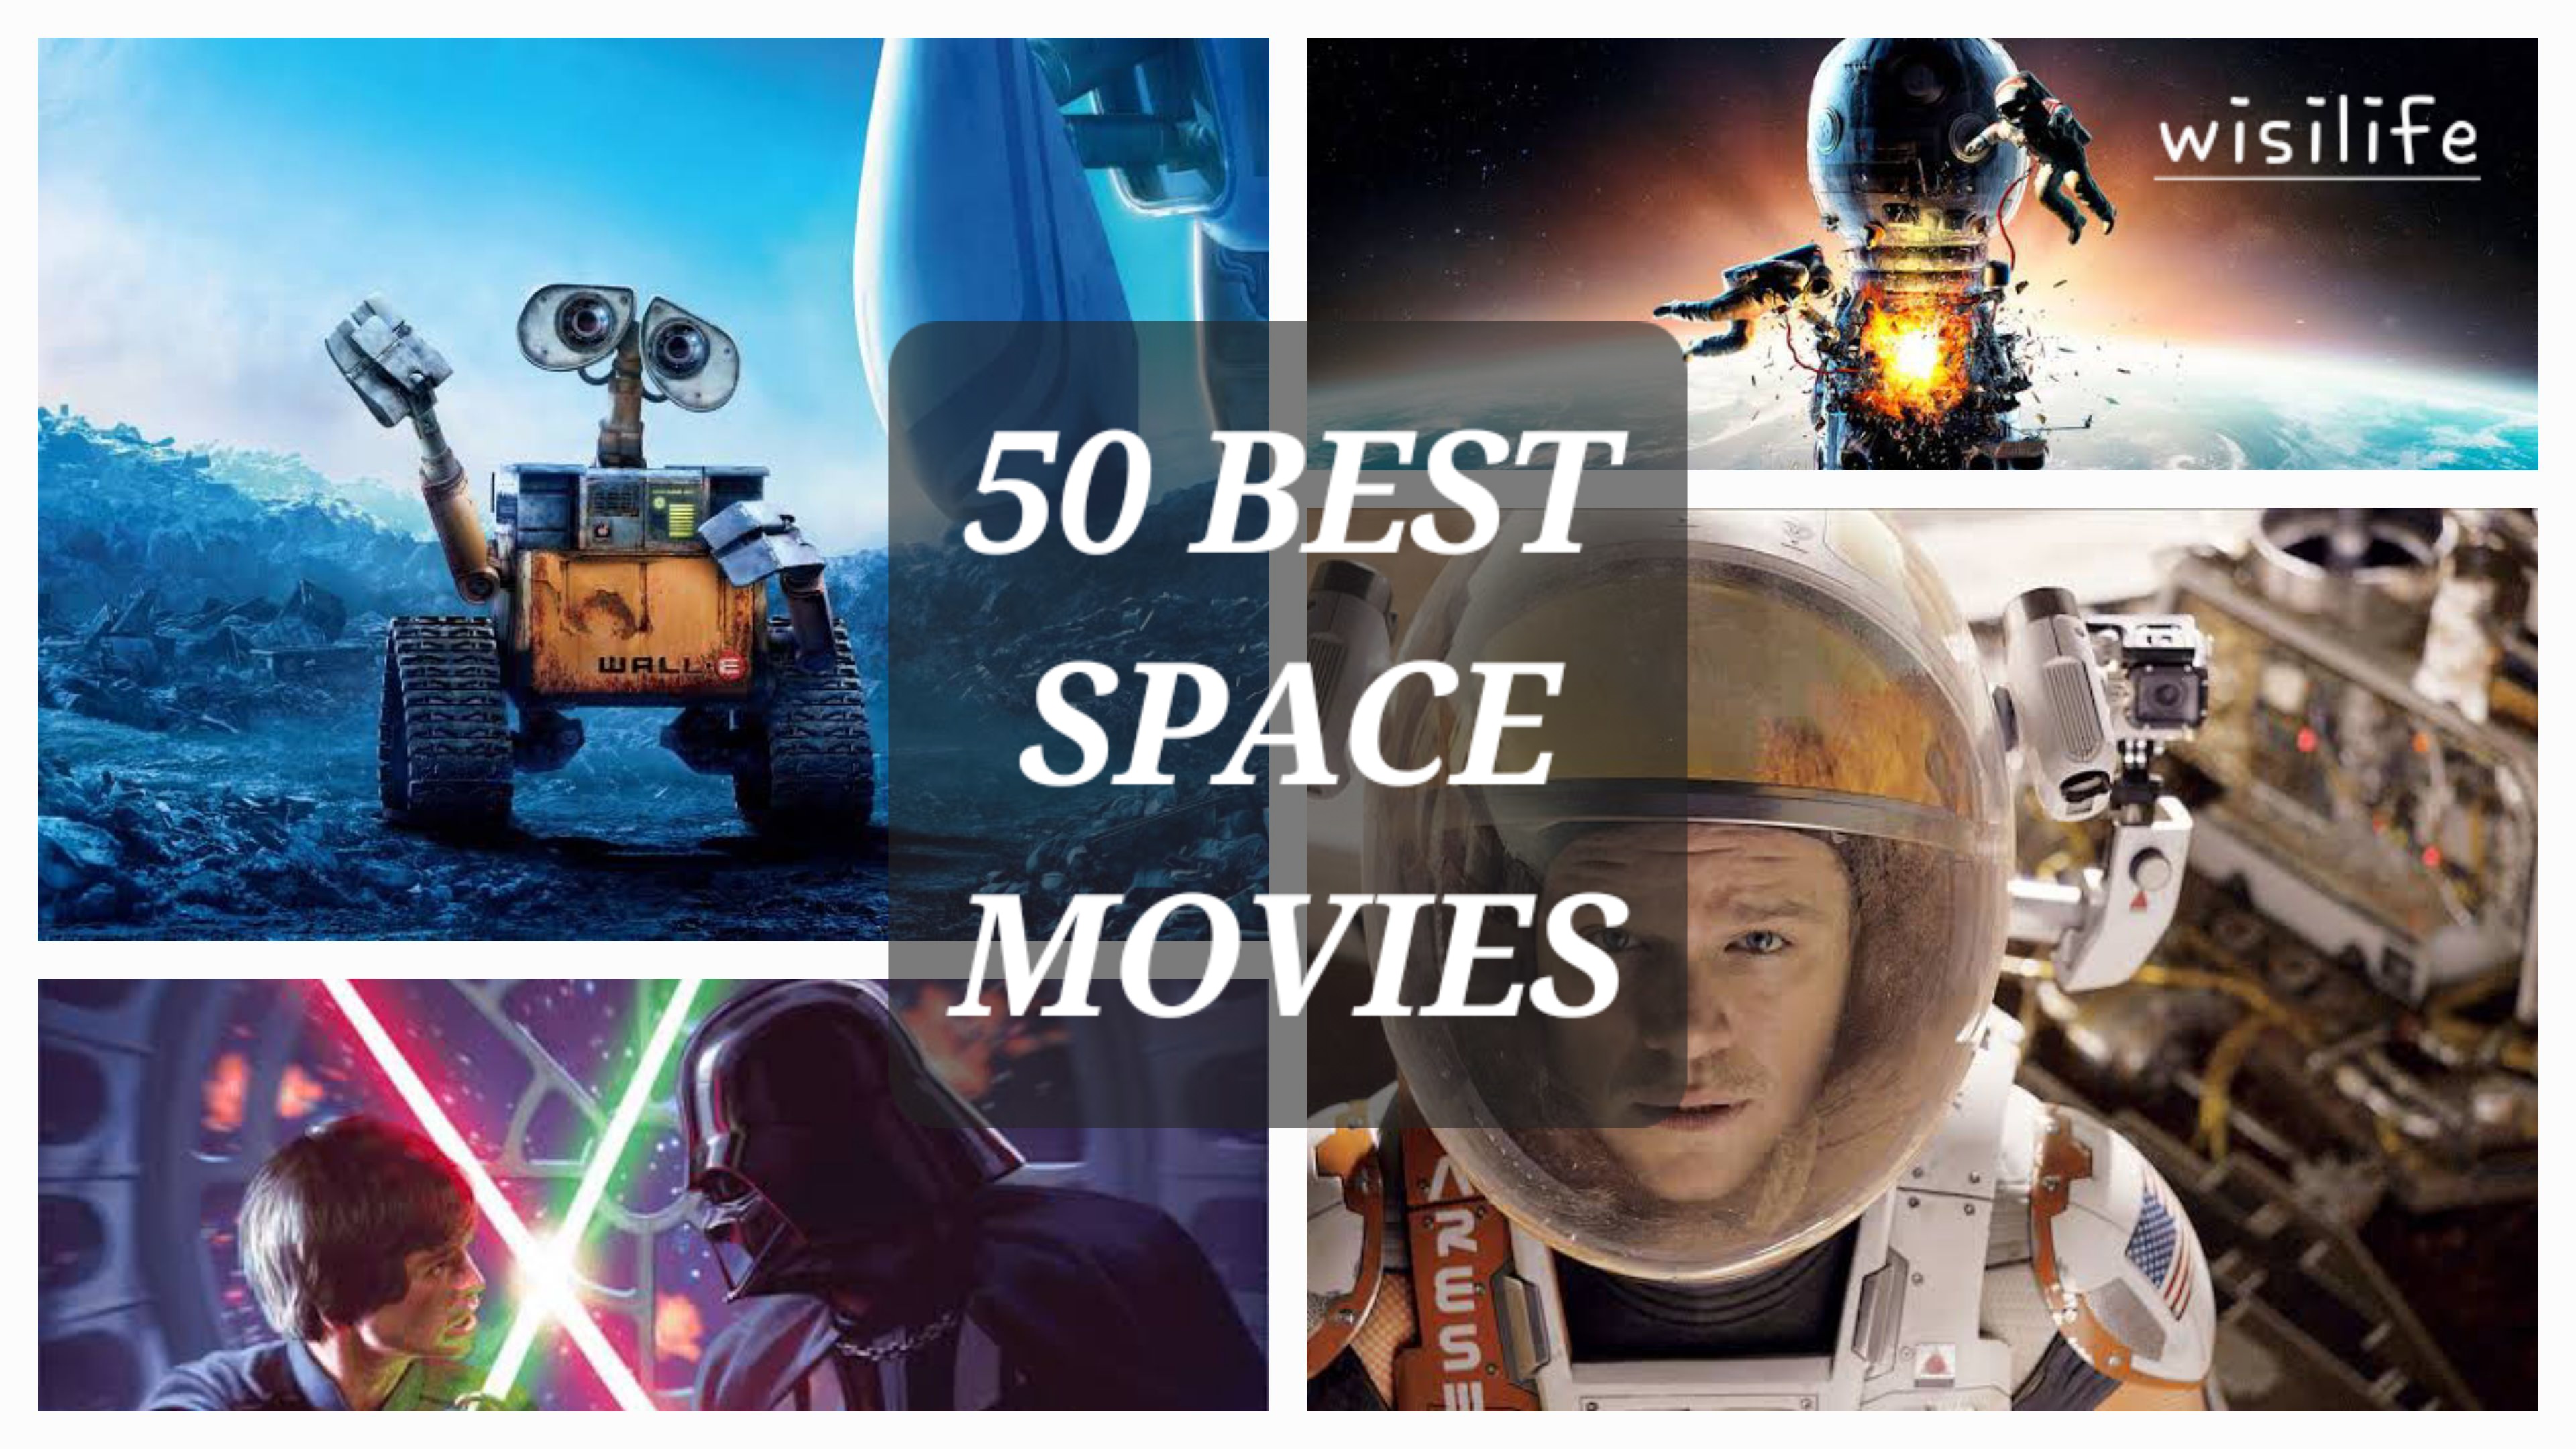 Space movies|Image by wisilife